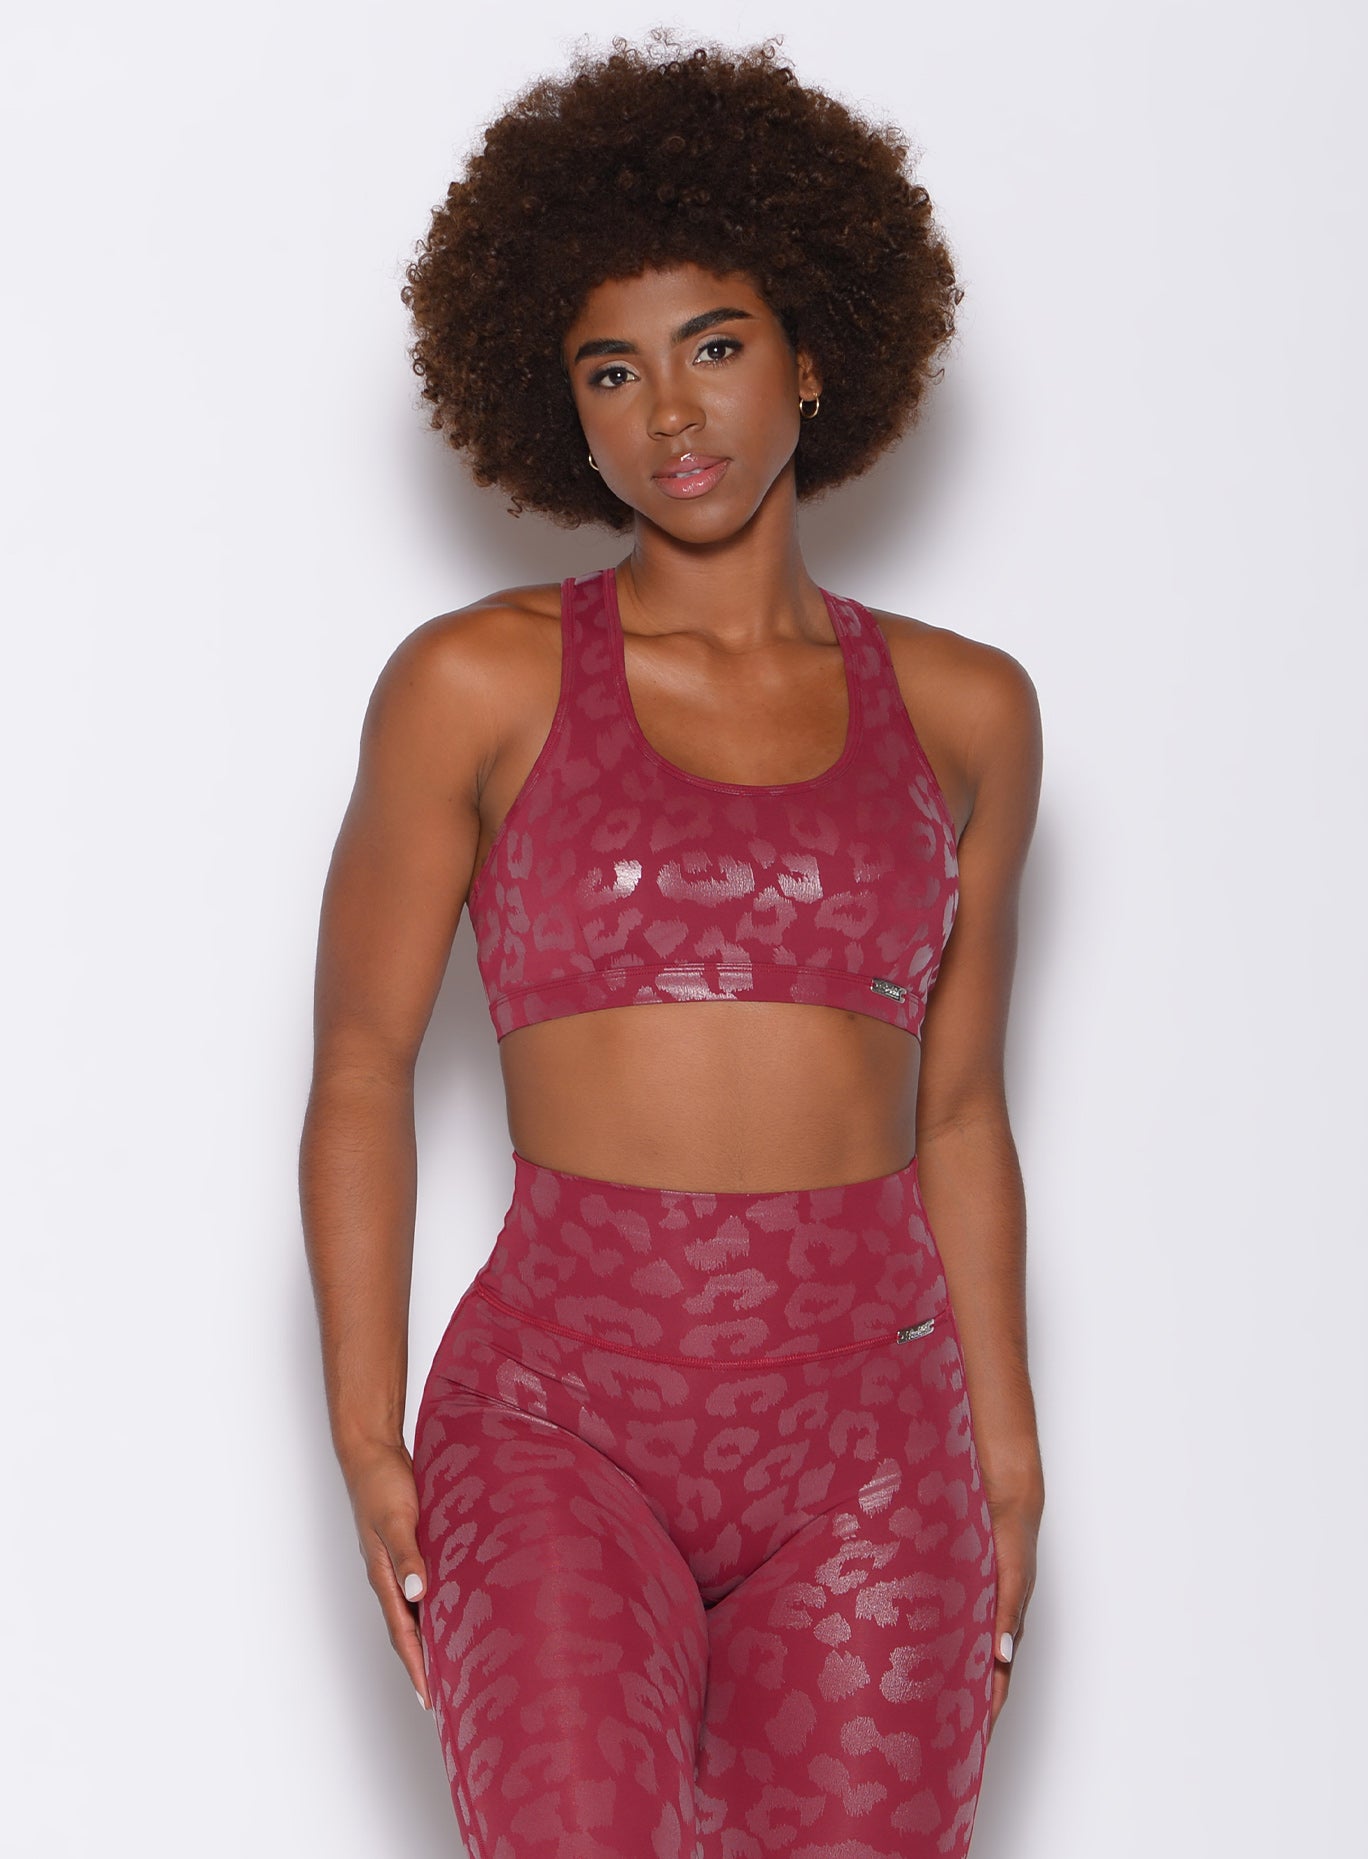 front profile view of a model facing forward wearing our shine leopard bra in Raspberry Leopard color along with the matching leggings